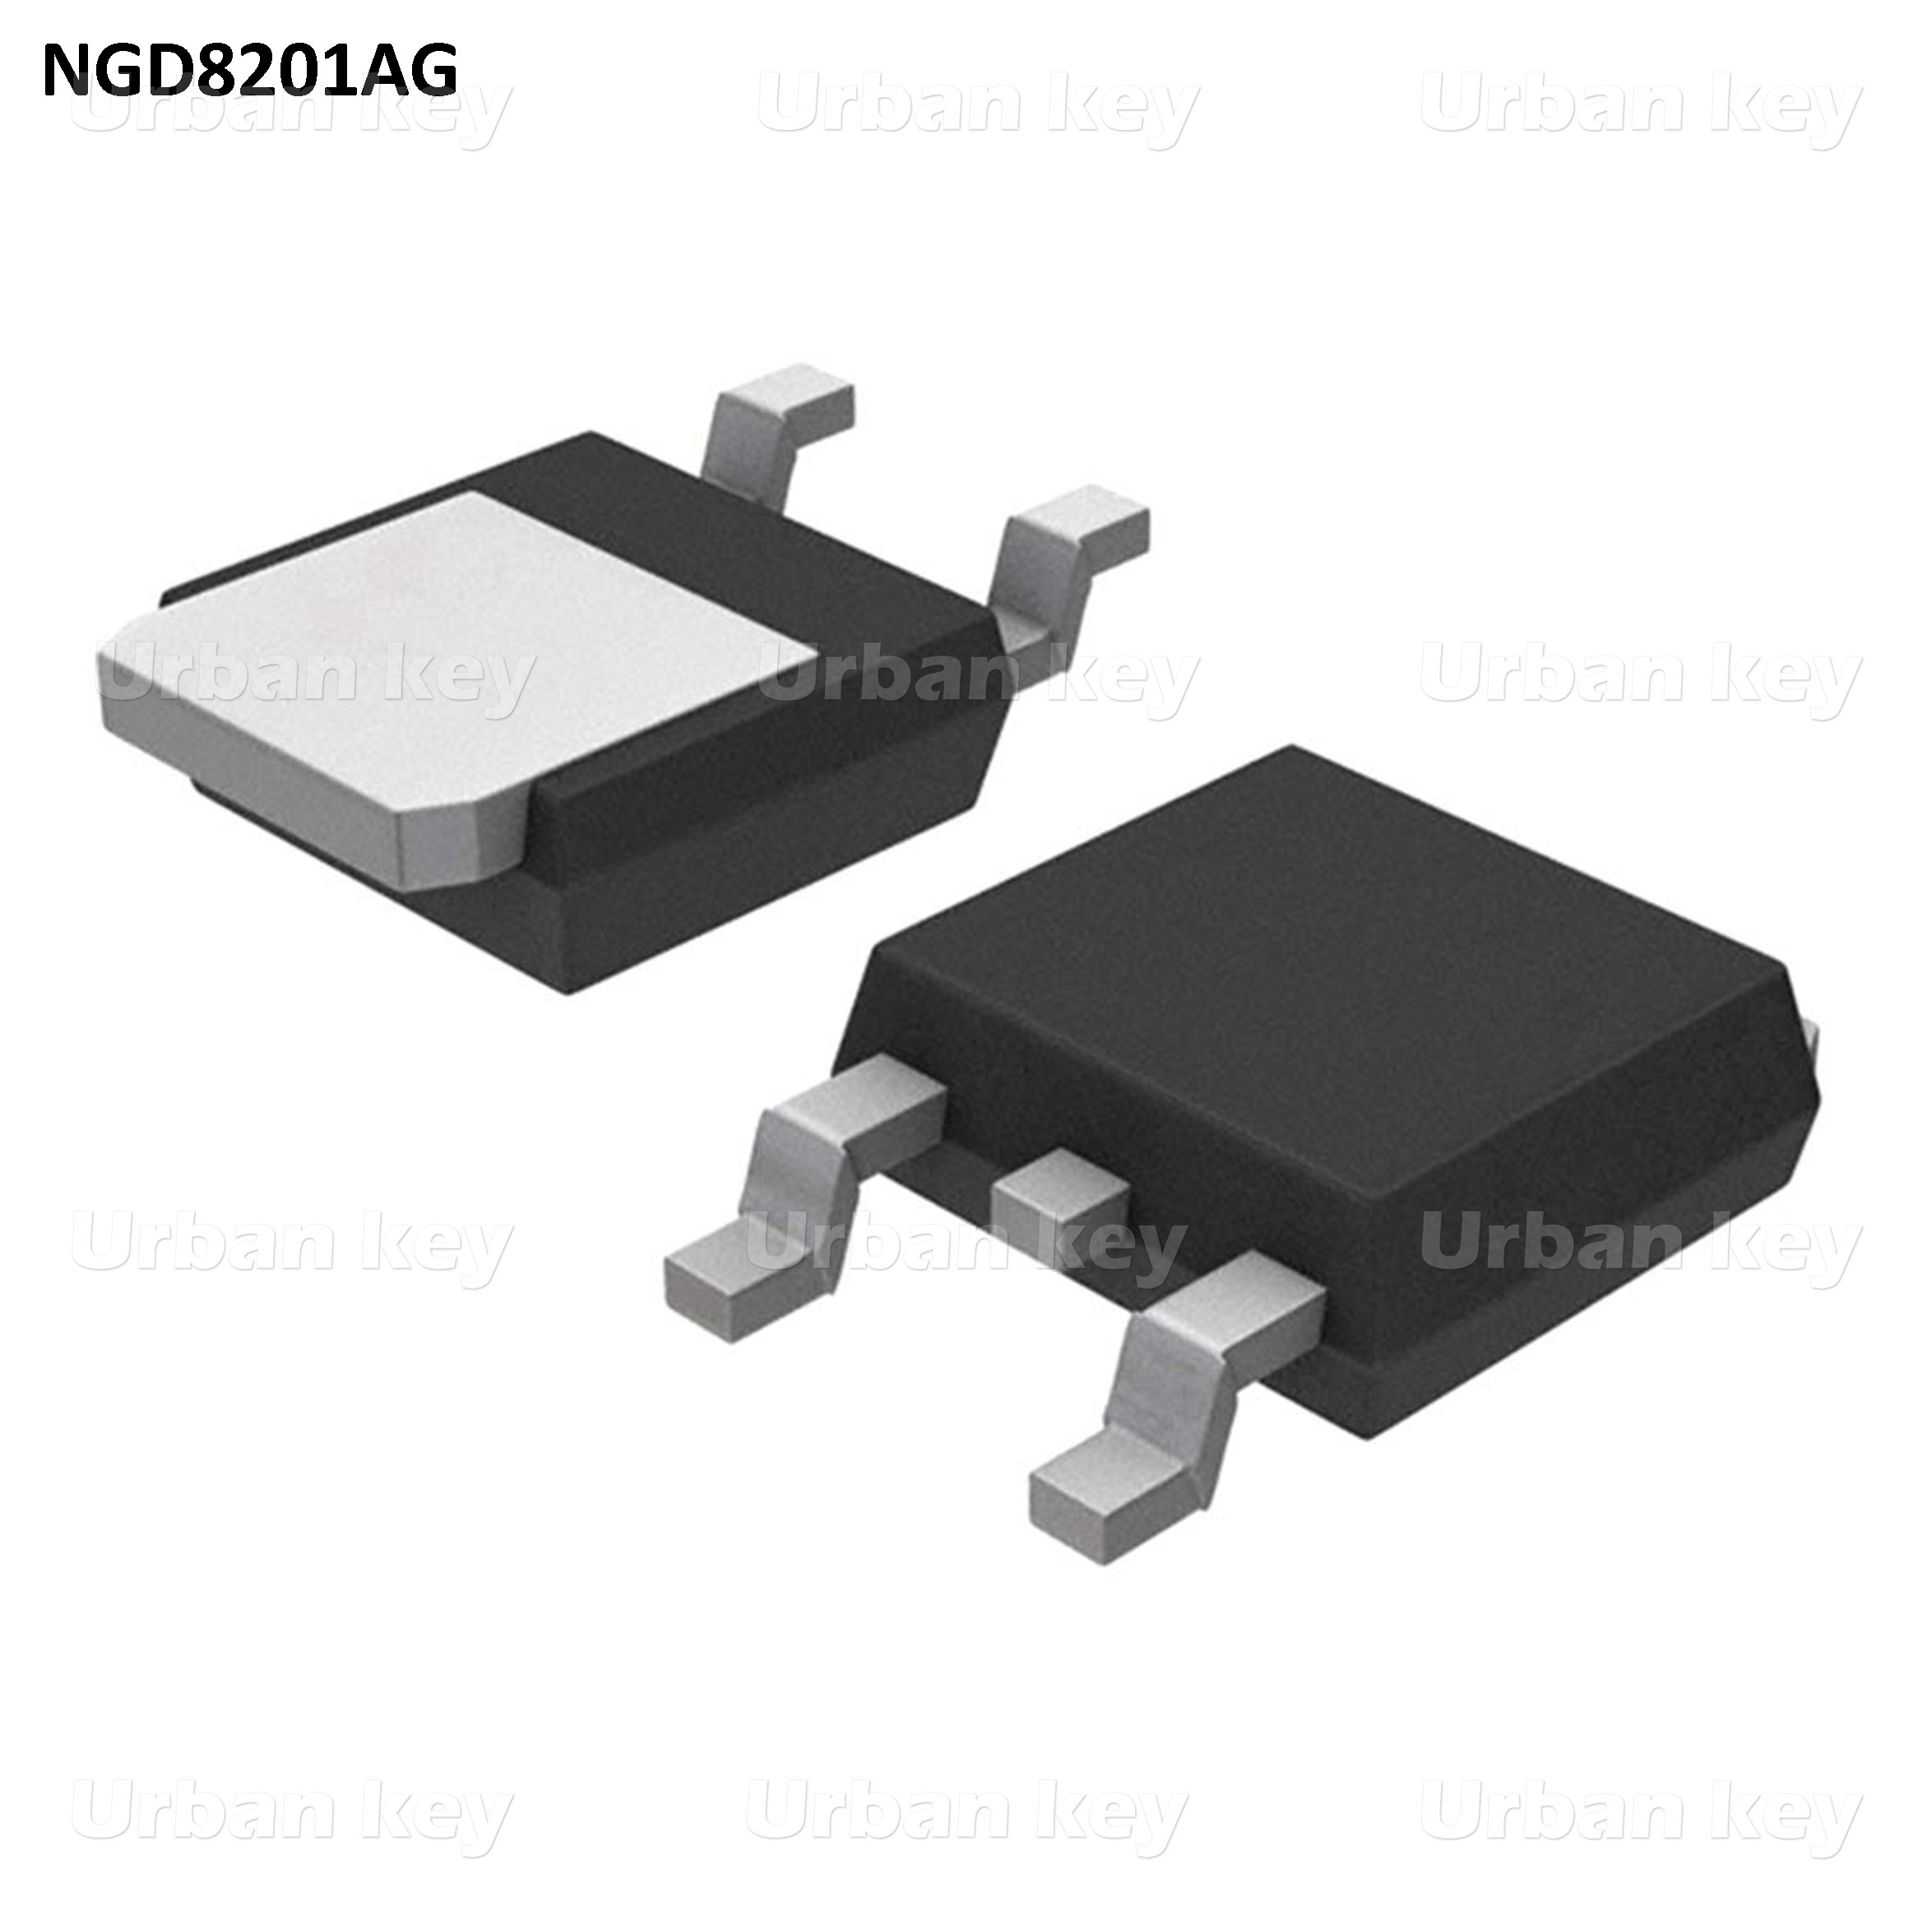 MOSFET NGD8201AG